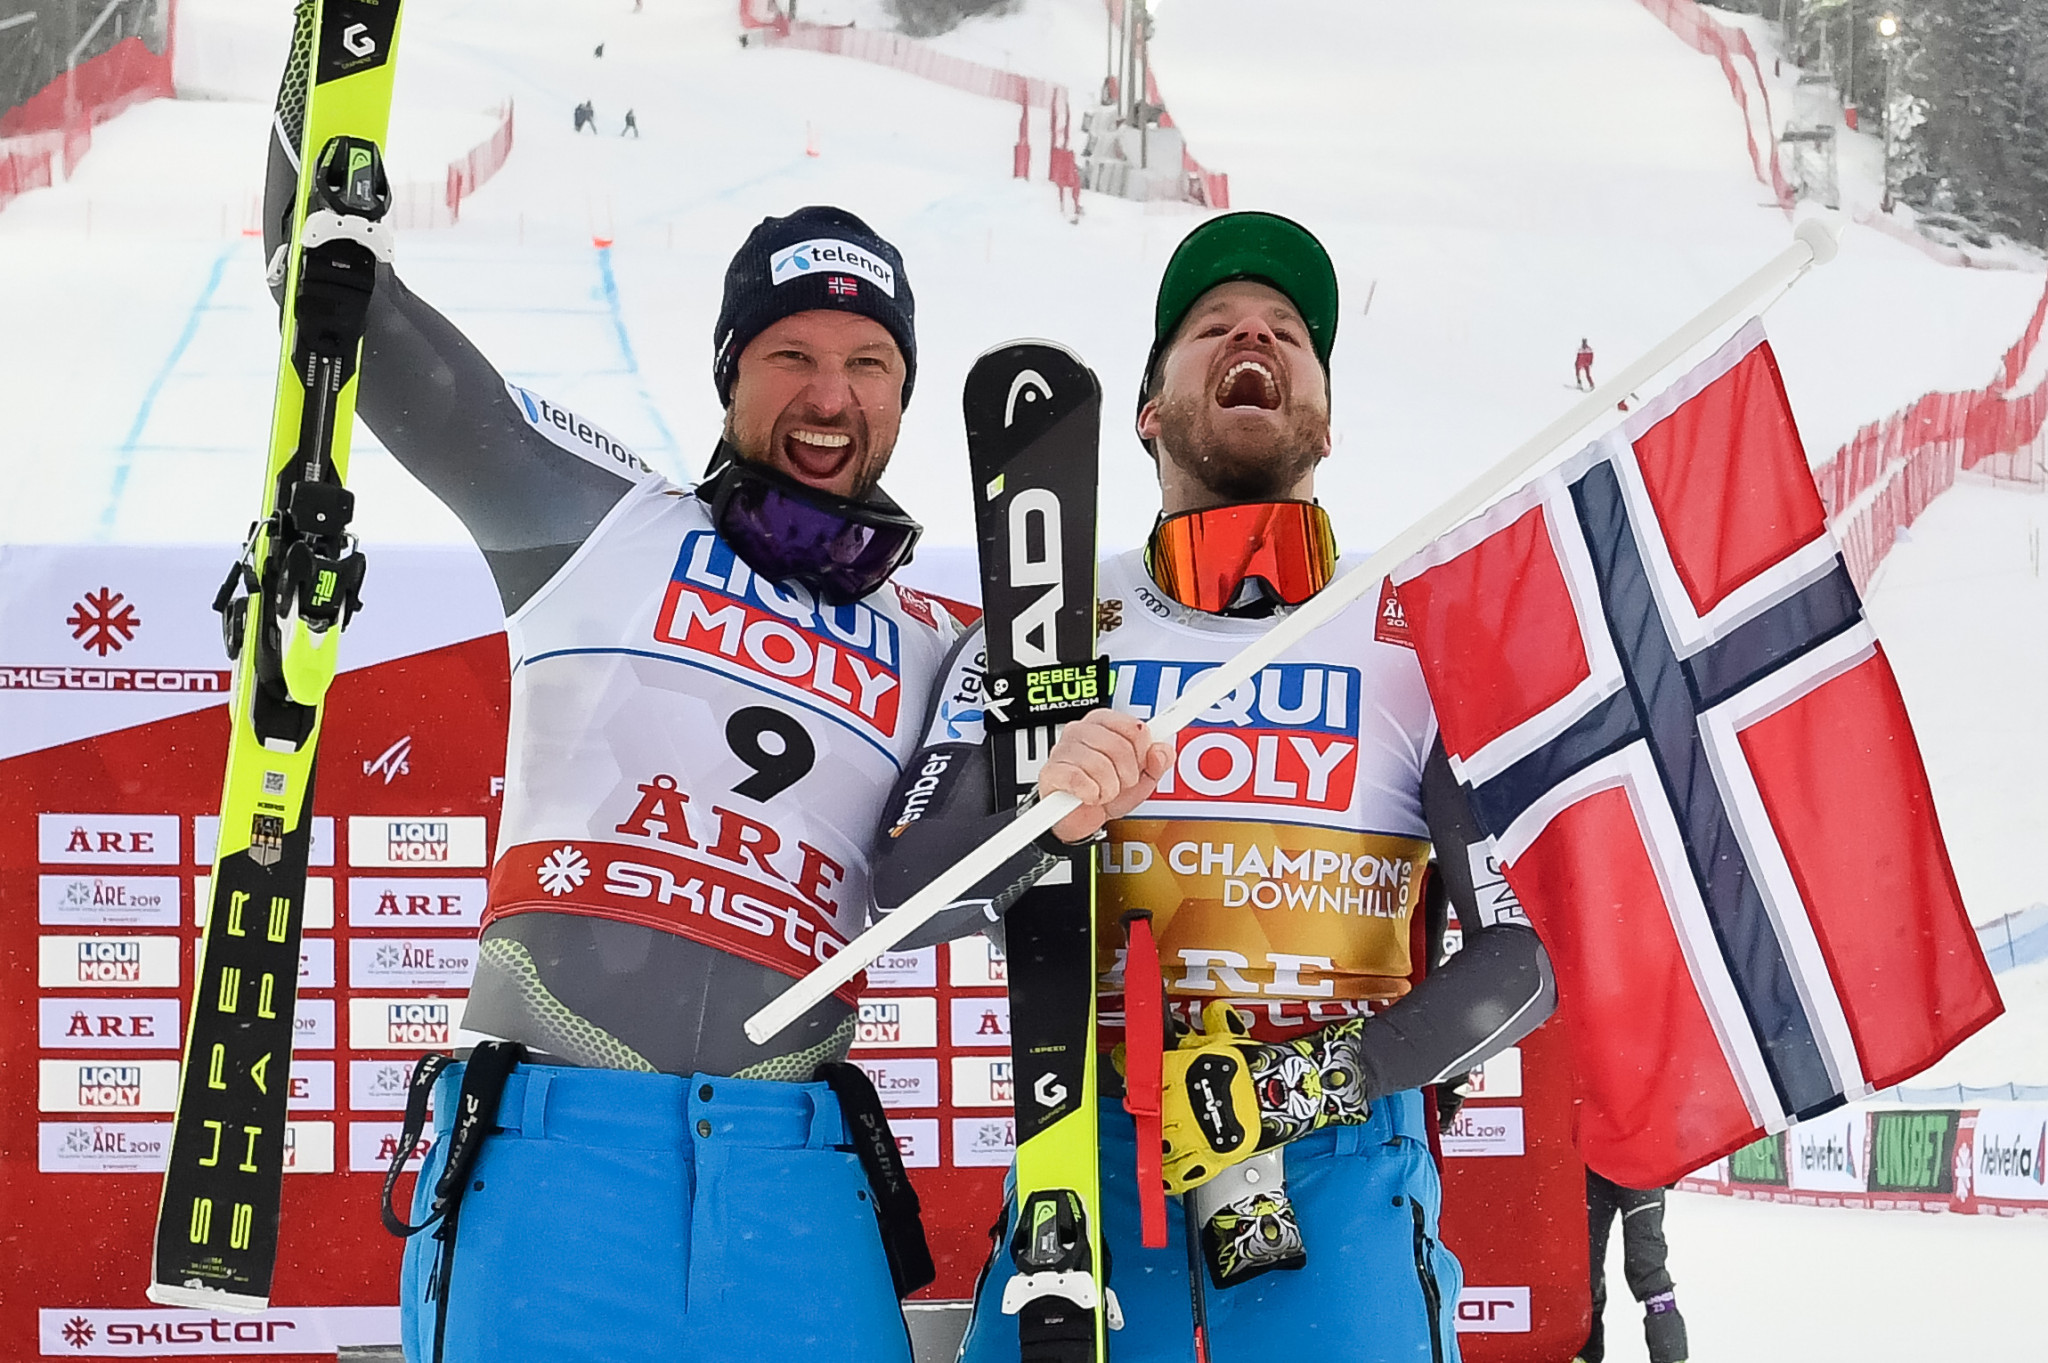 Jansrud secures downhill title as Svindal has silver swansong at FIS Alpine Skiing World Championships